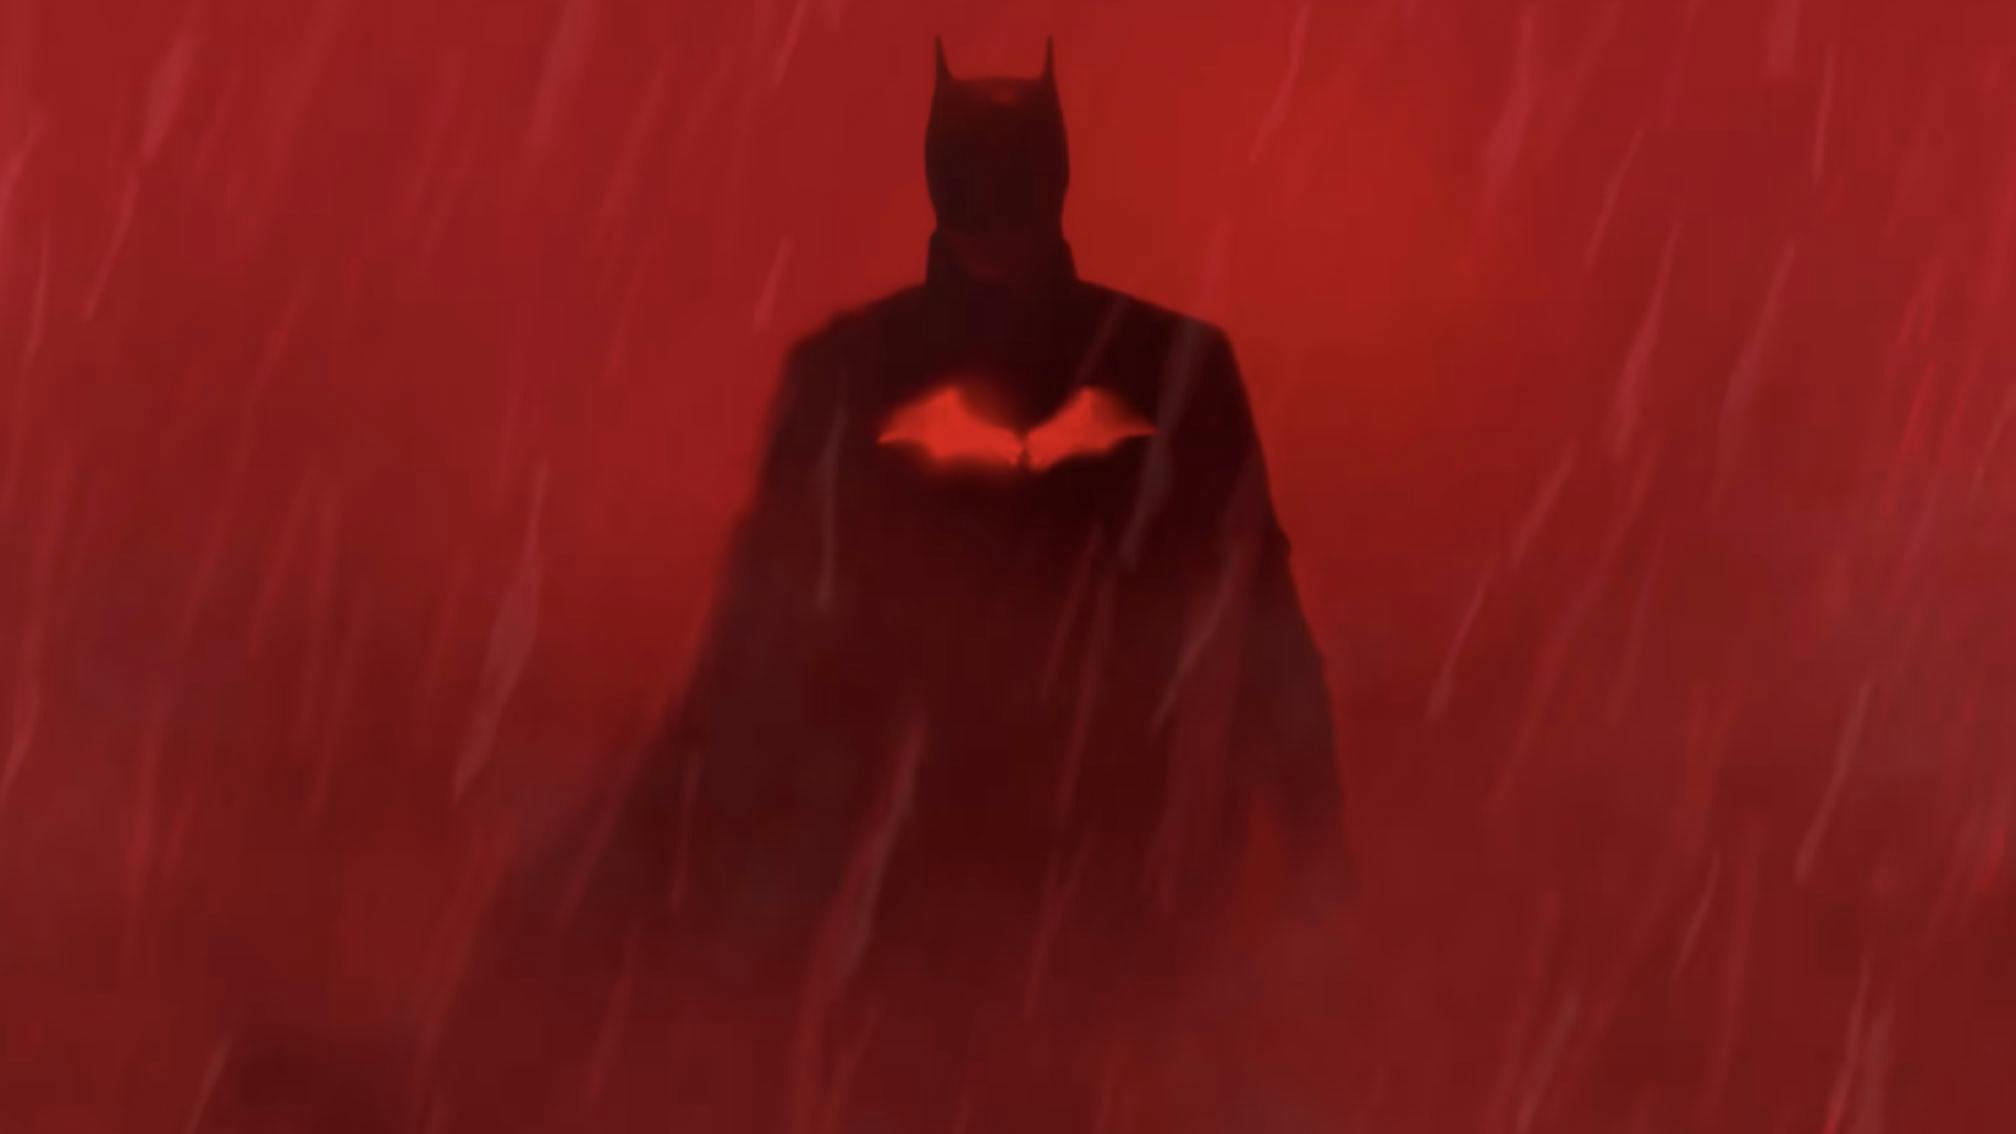 Listen to the spine-tingling The Batman theme